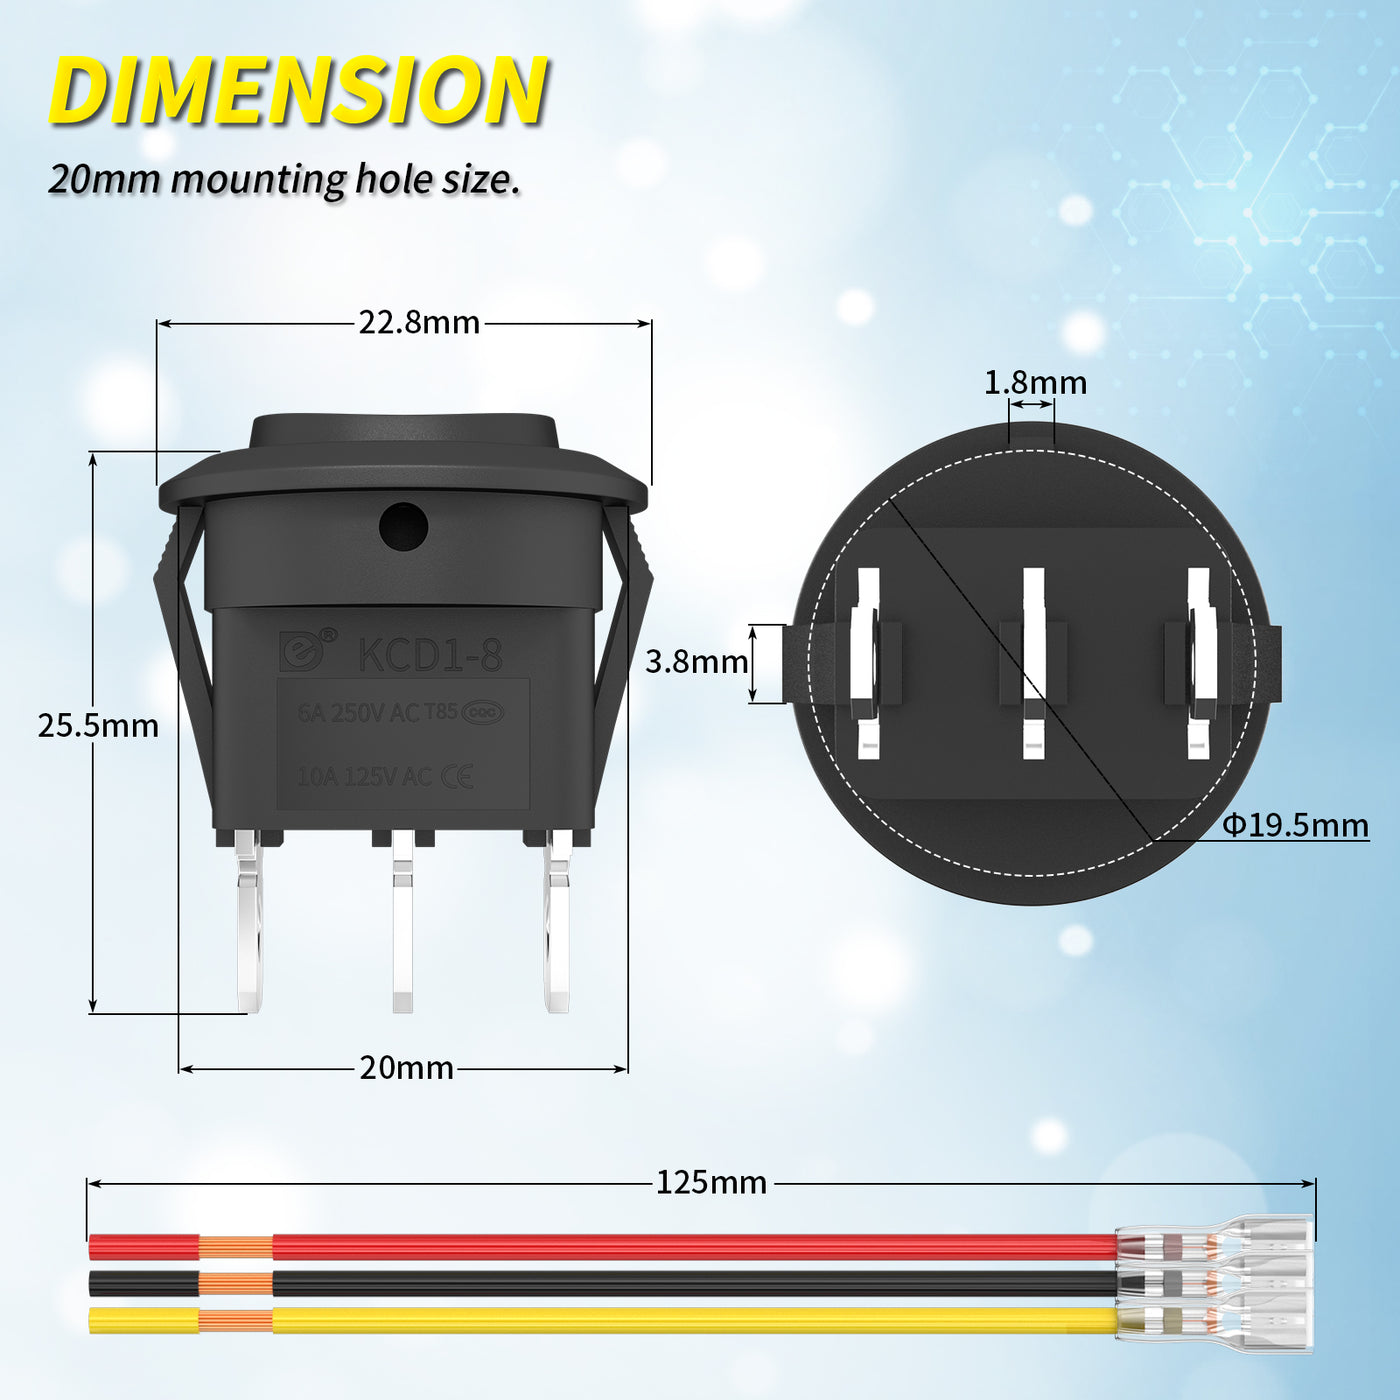 KCD1-8-103 3 ON-OFF-ON Round Rocker Switch Dimension